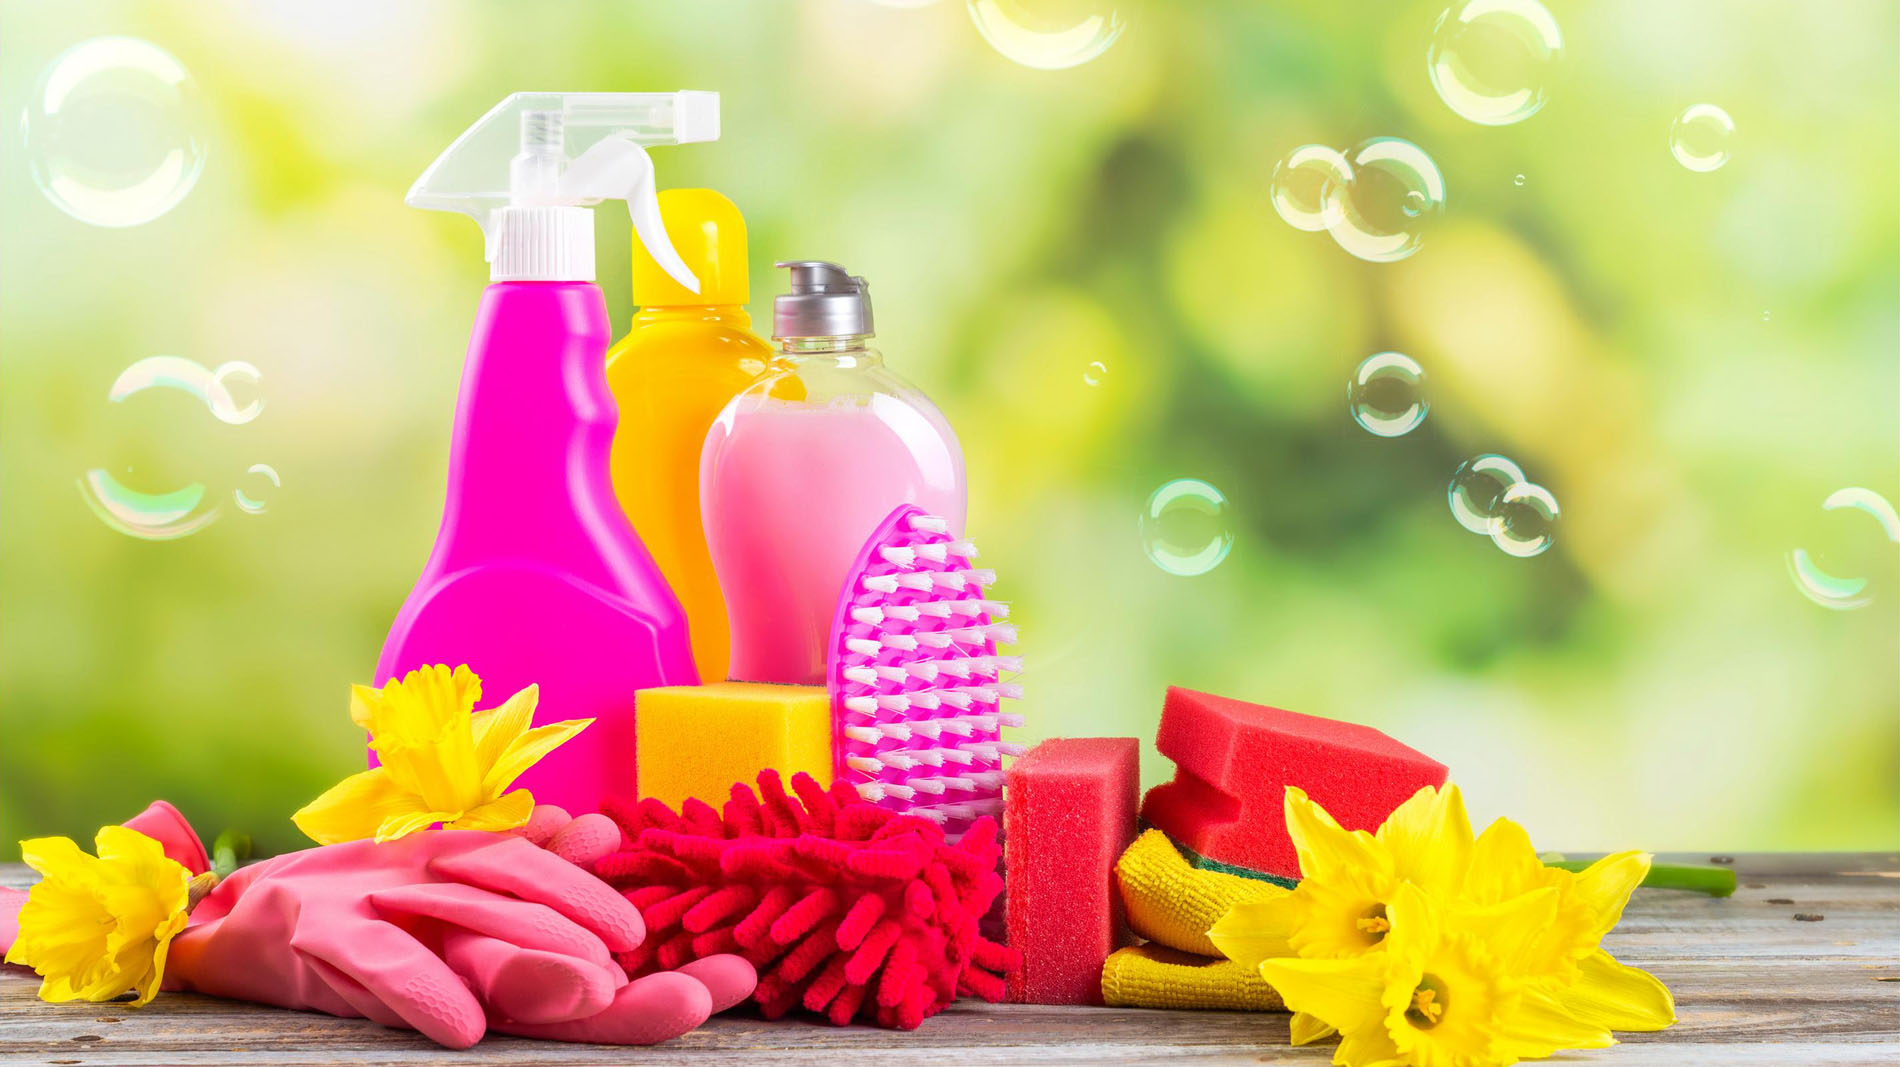 6 Tips for Successful Spring Cleaning